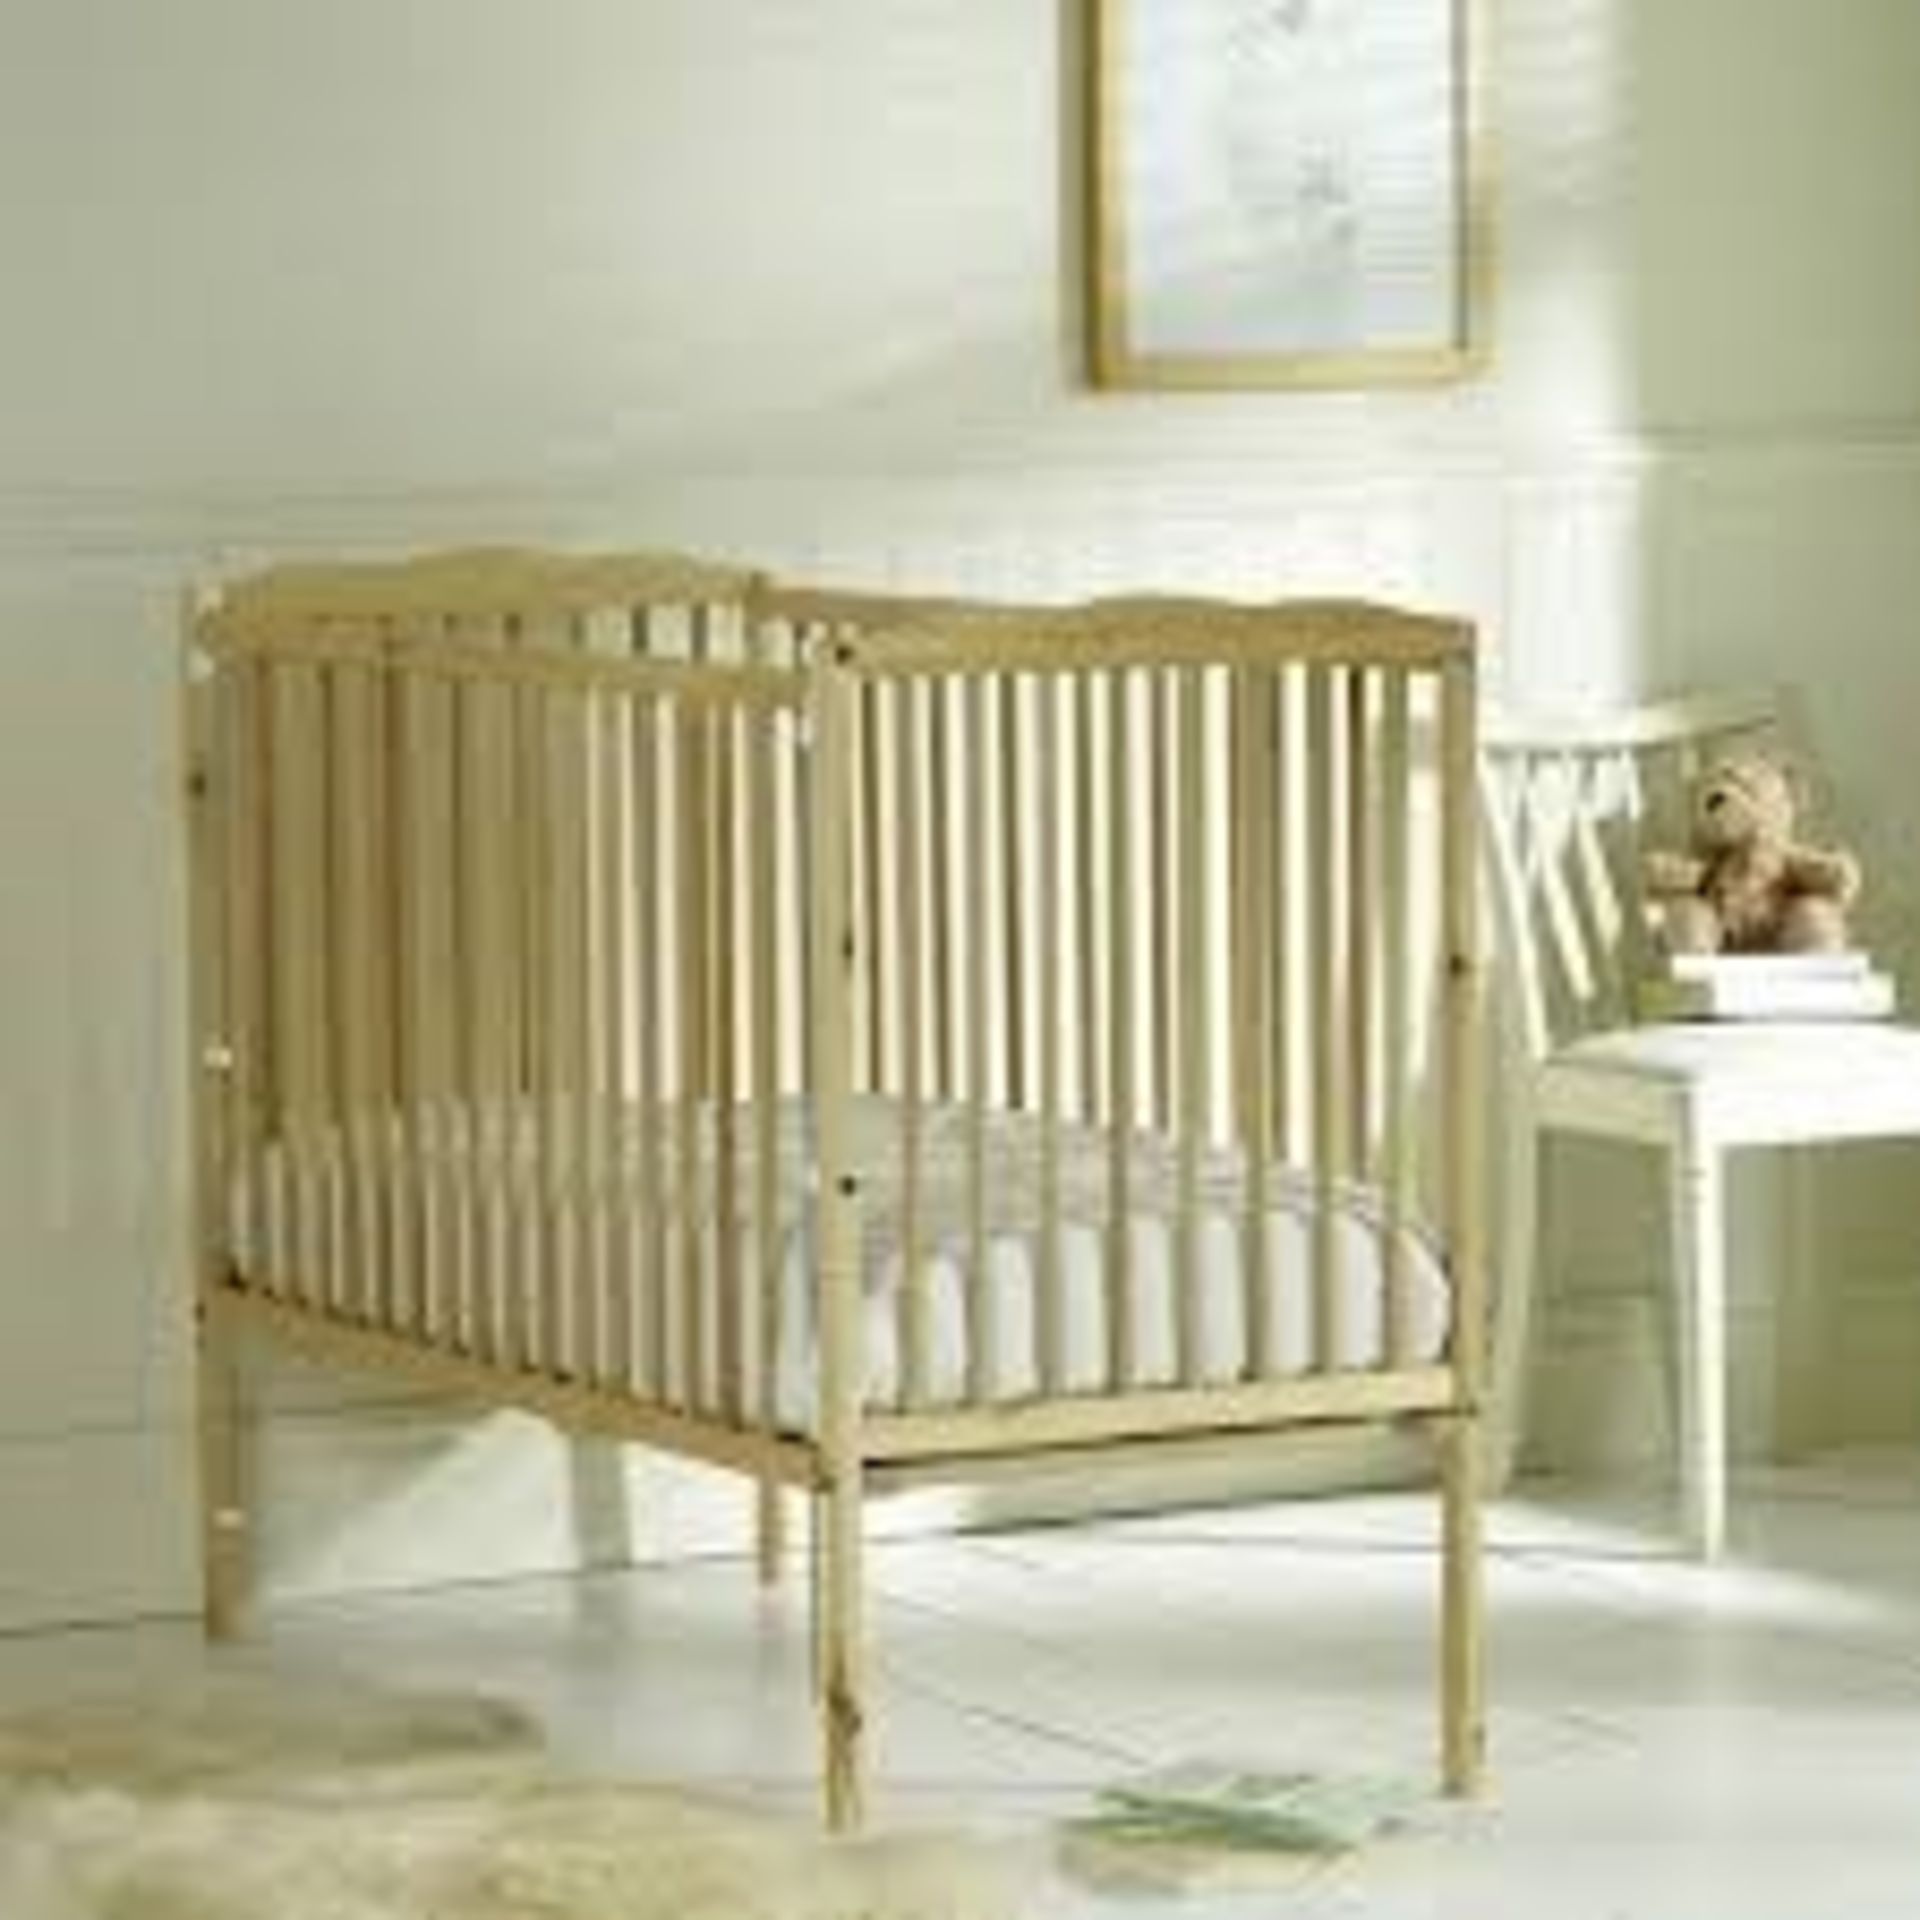 Boxed Natural Wooden Jessica Cot RRP£140 (Viewing or Appraisals Highly Recommended)